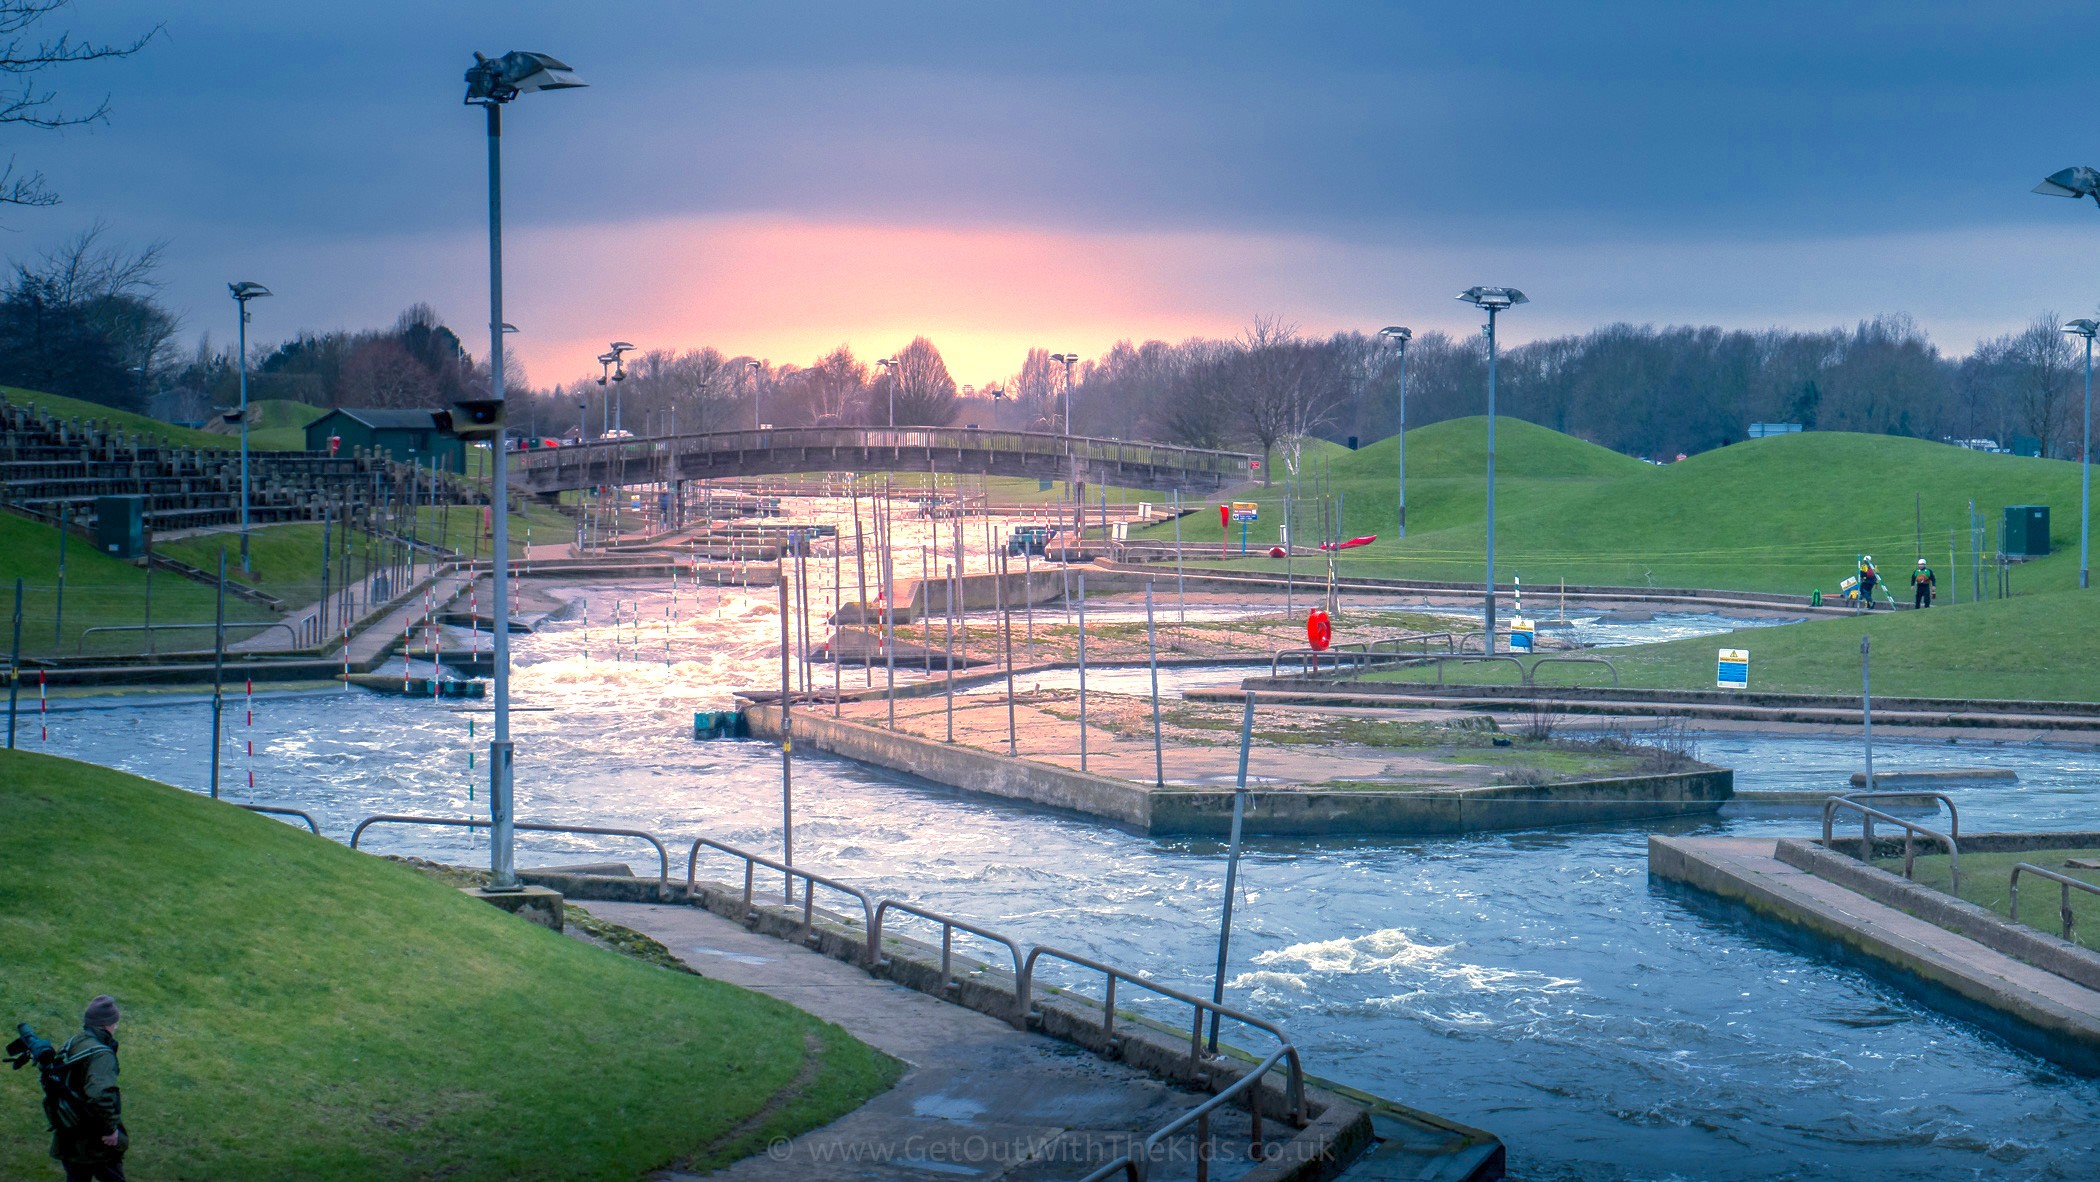  The White Water Course at the National Watersports Centre